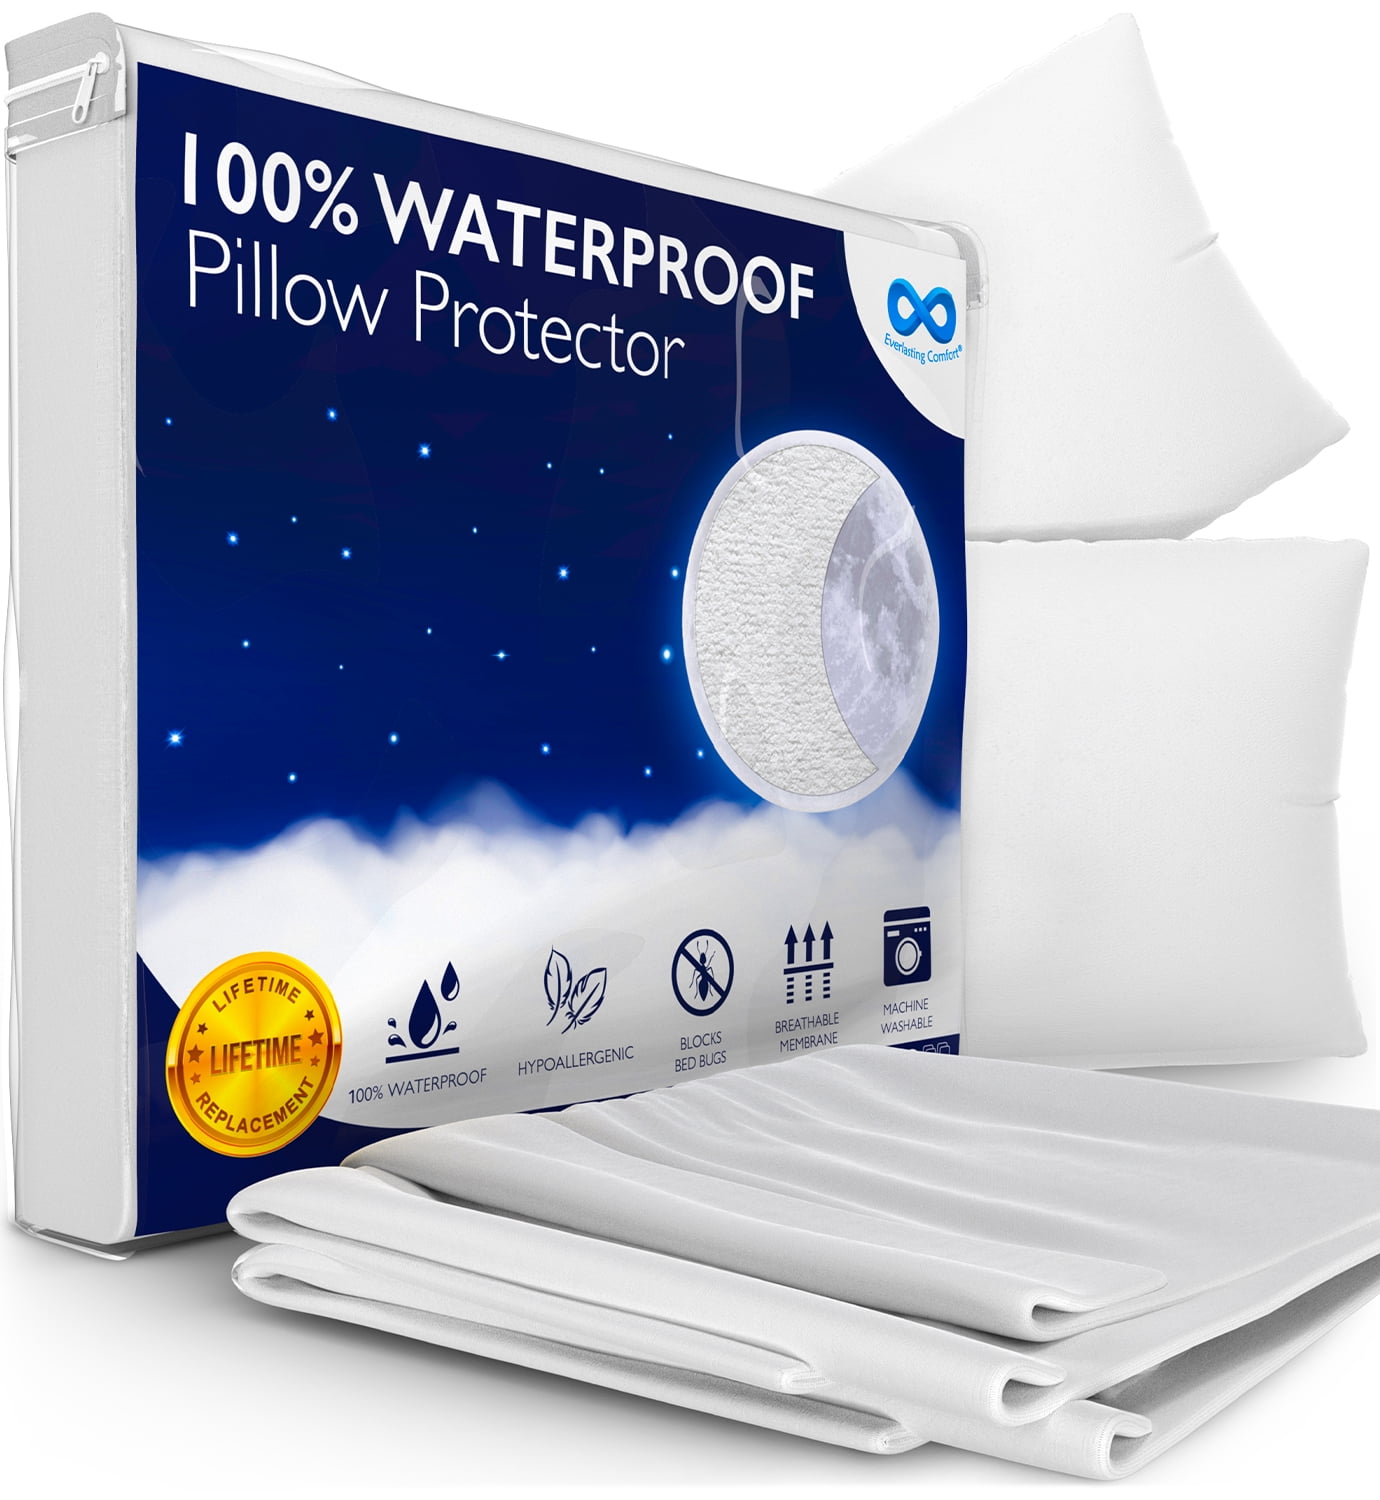 King Size Waterproof Cooling Pillow Protector by Slumberfy - Premium Skin-Safe Pillow Cover with Zipper Closure - Natural Fabric with ArcticTex